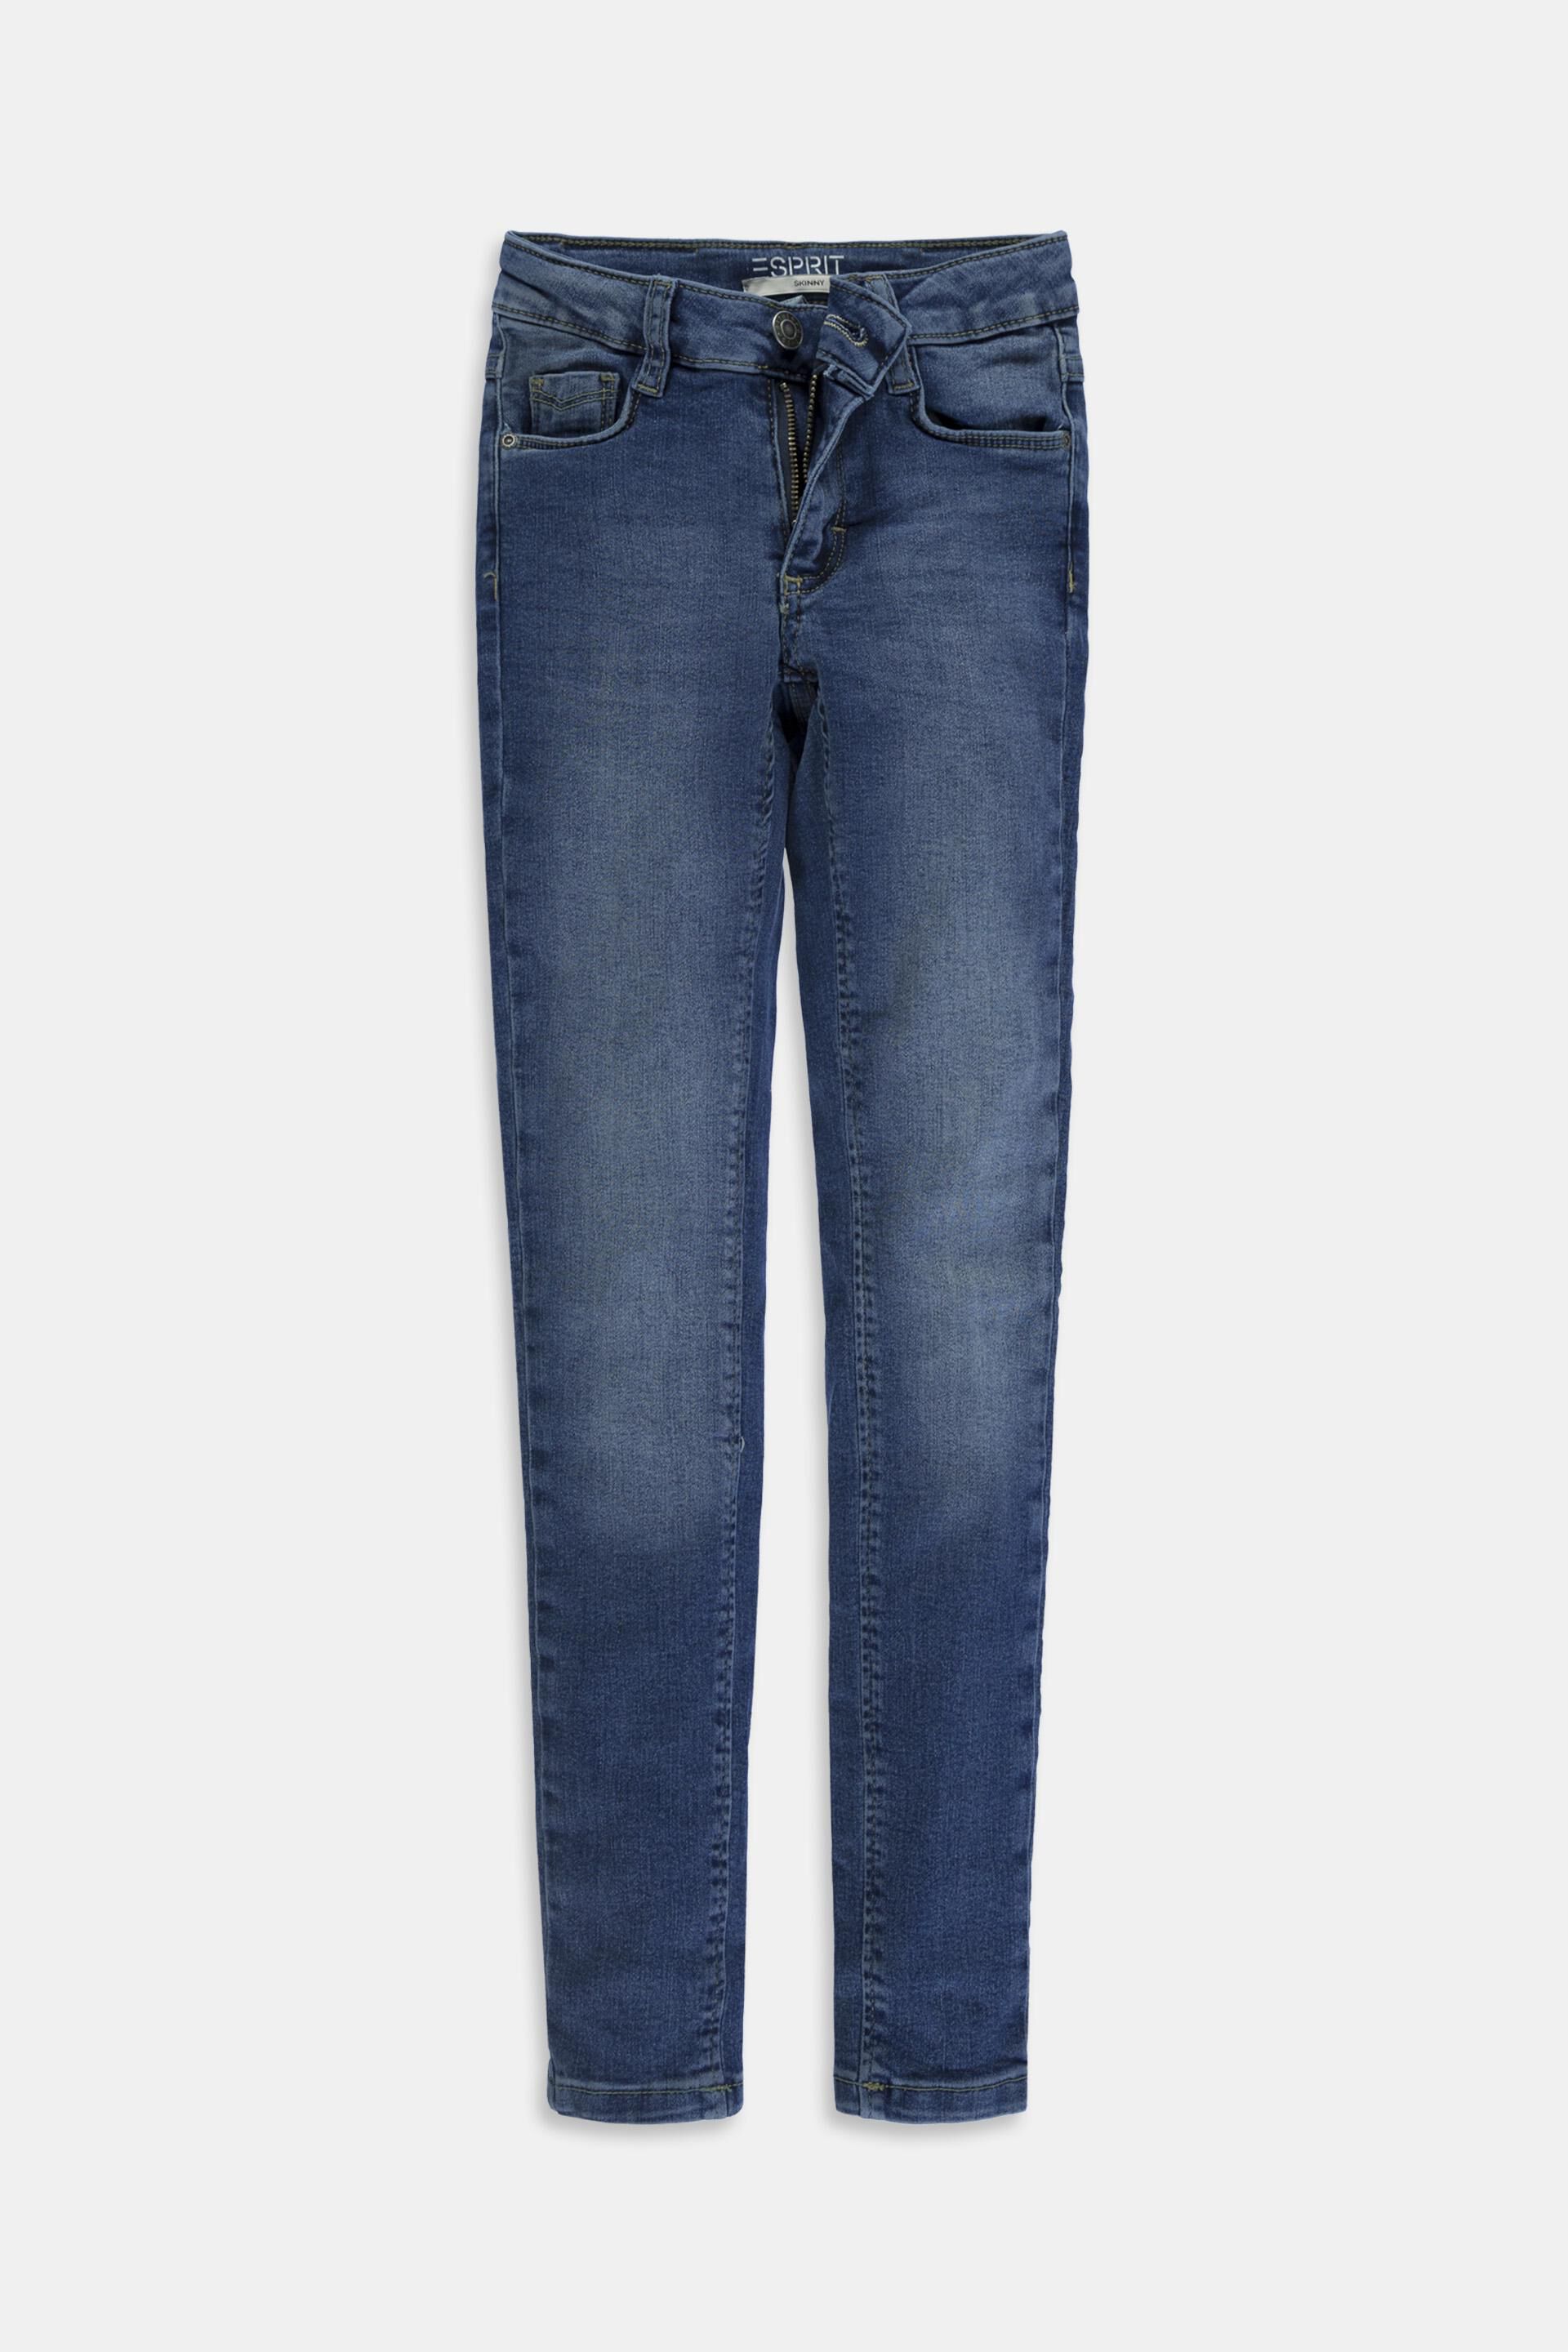 Esprit Outlet Stretch jeans available in different widths with an adjustable waistband